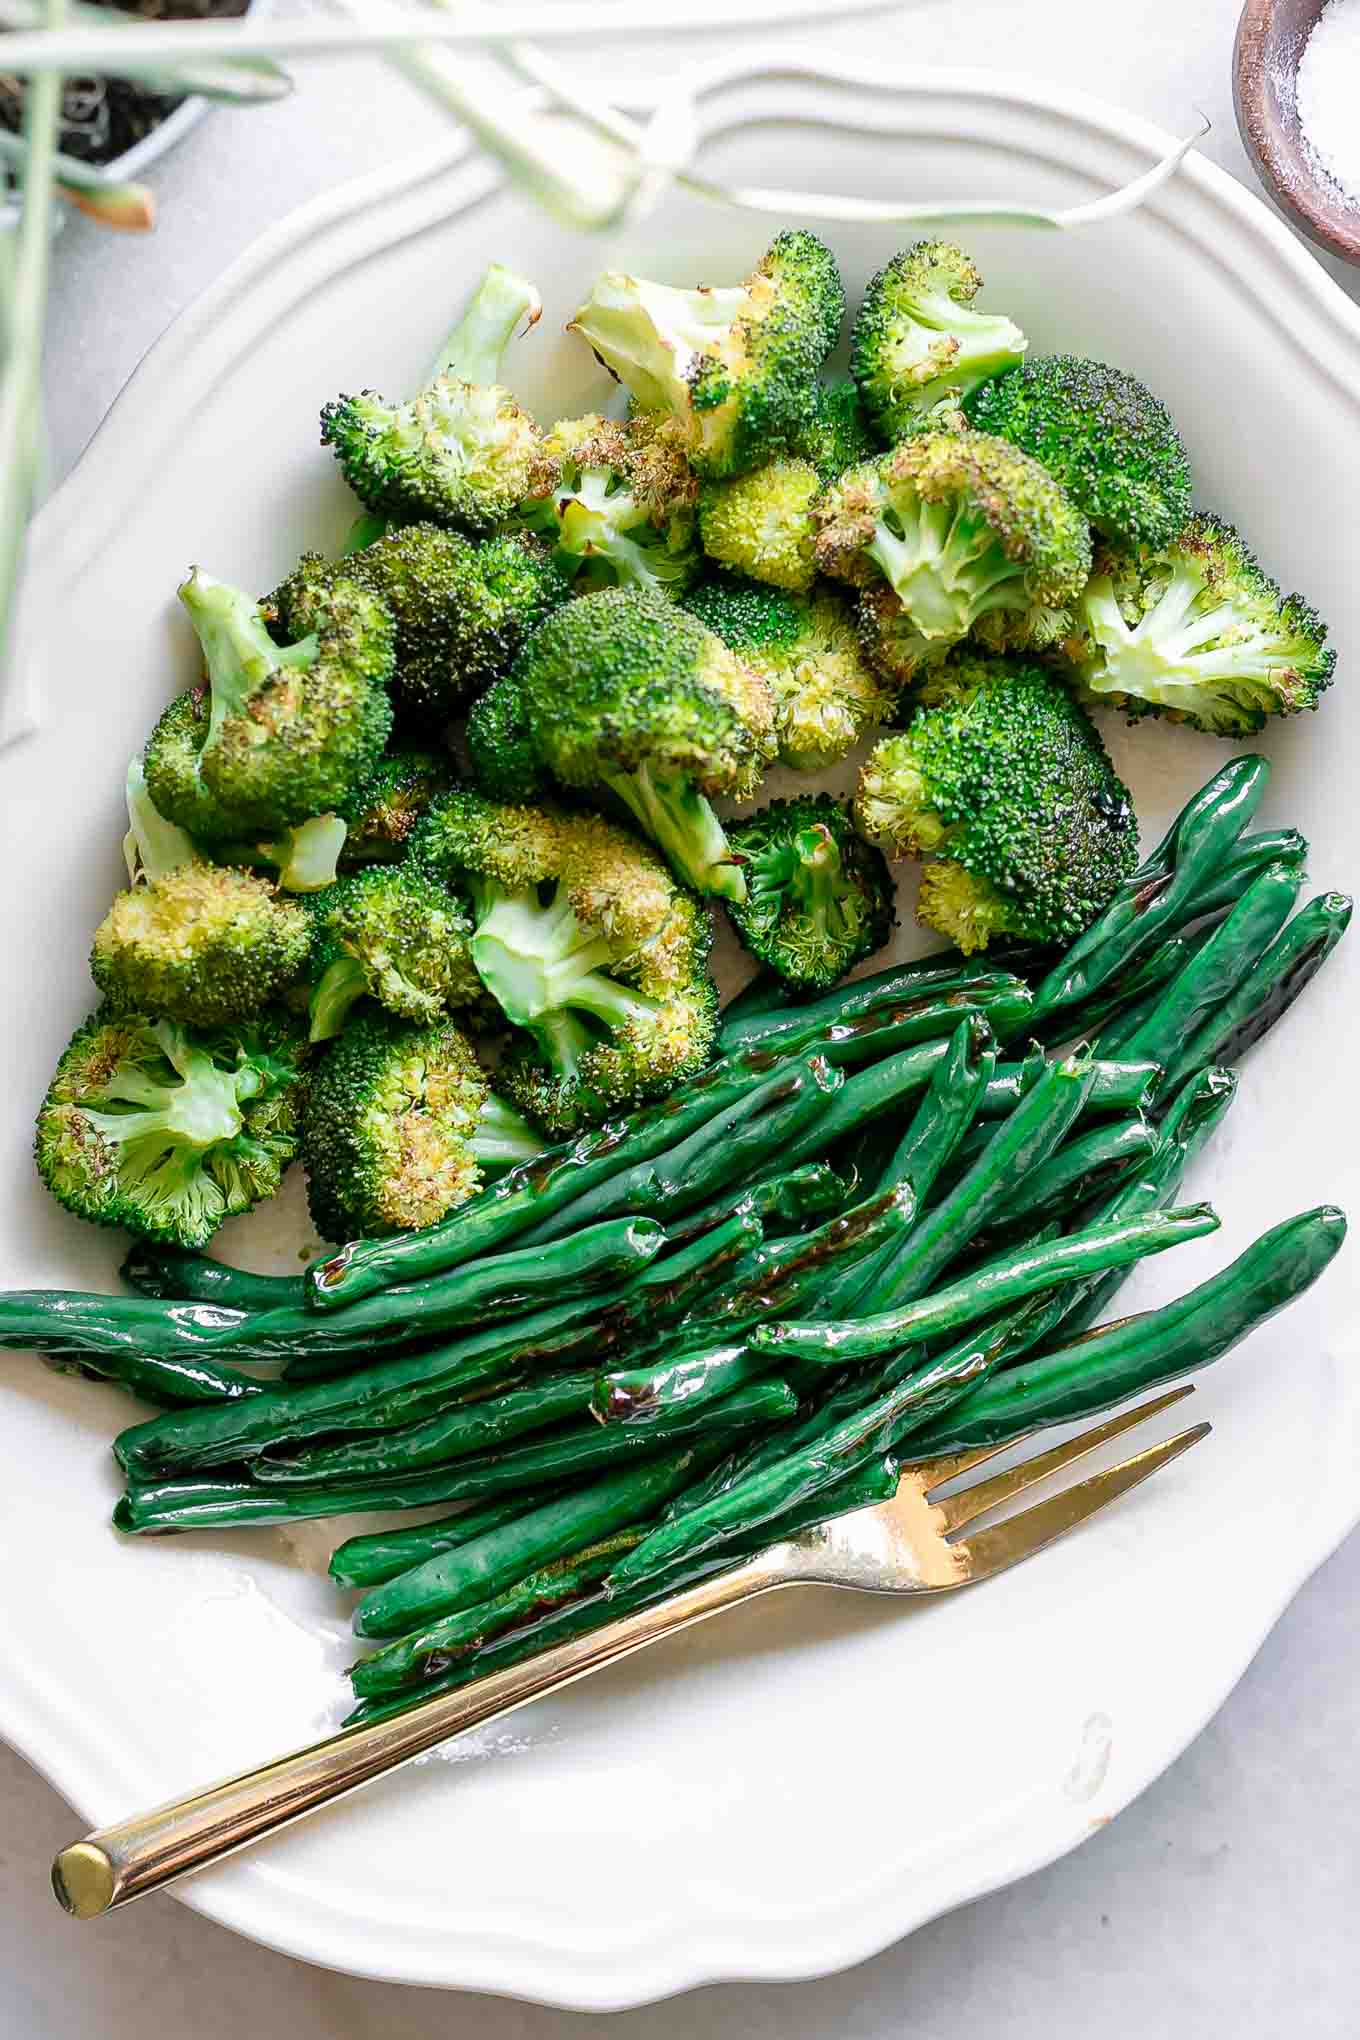 Roasted Broccoli and Green Beans